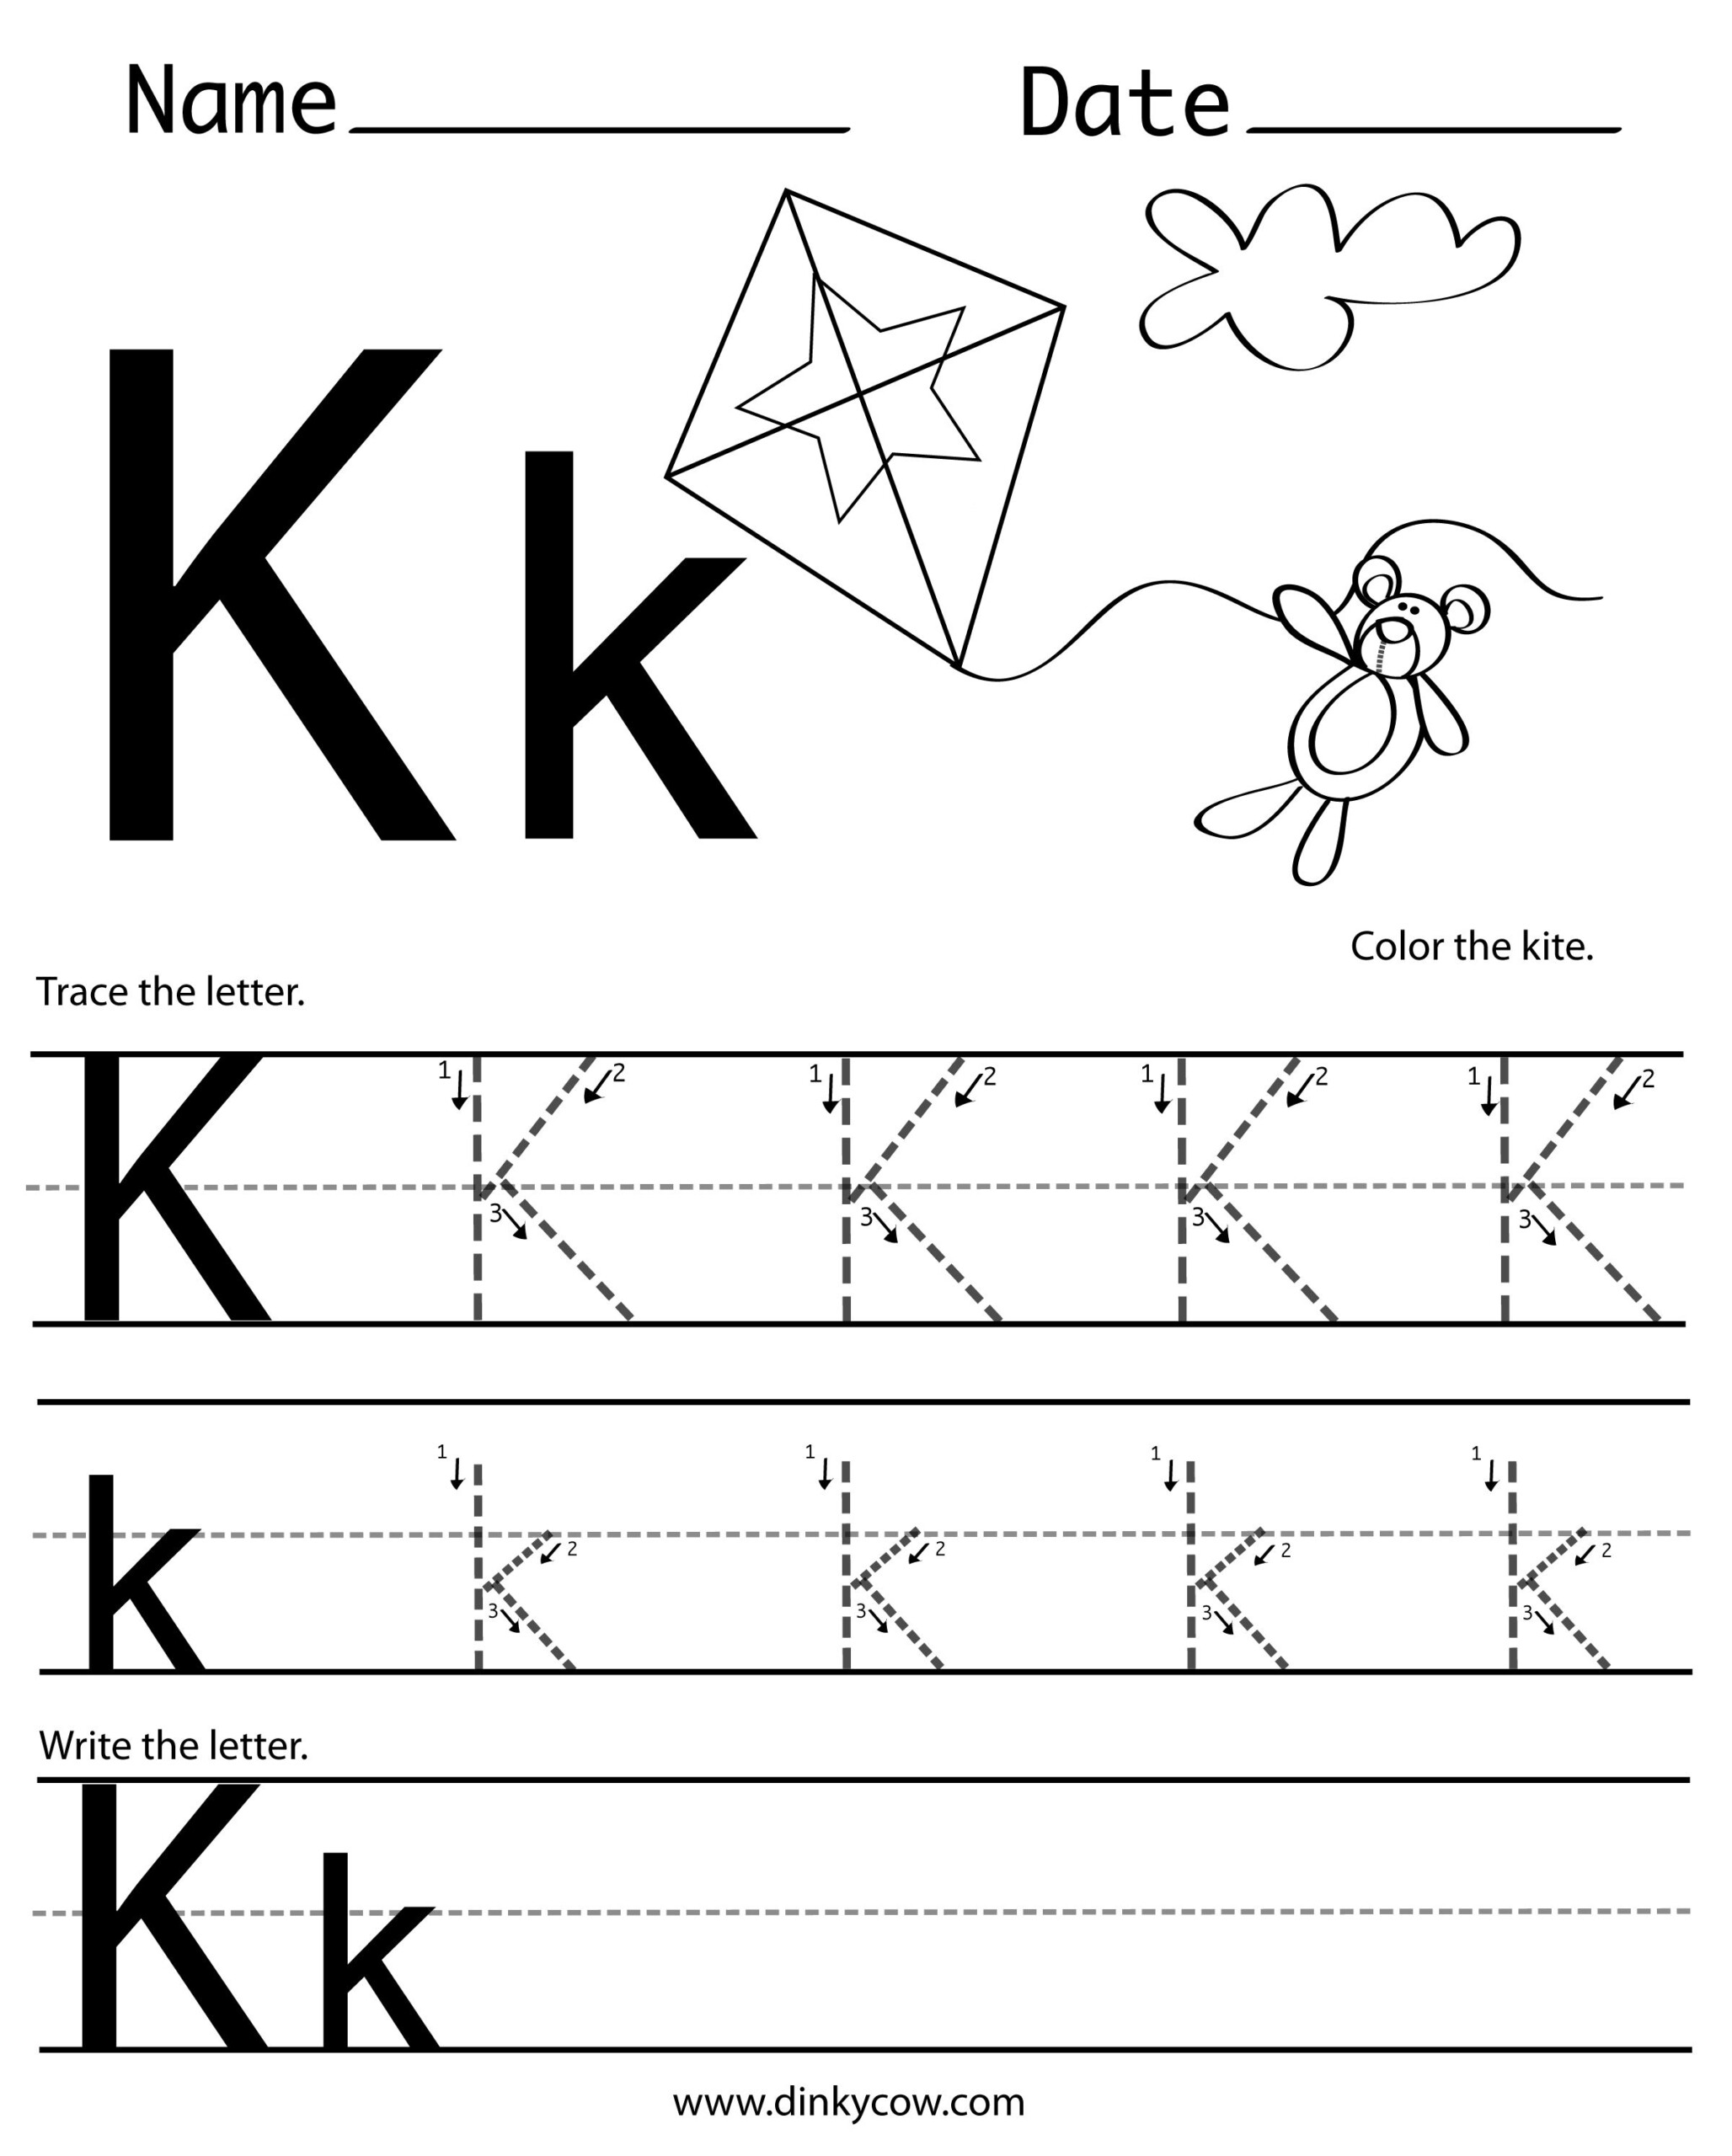 Pinmareese On Tracing | Free Handwriting Worksheets inside Tracing Letter K Worksheets